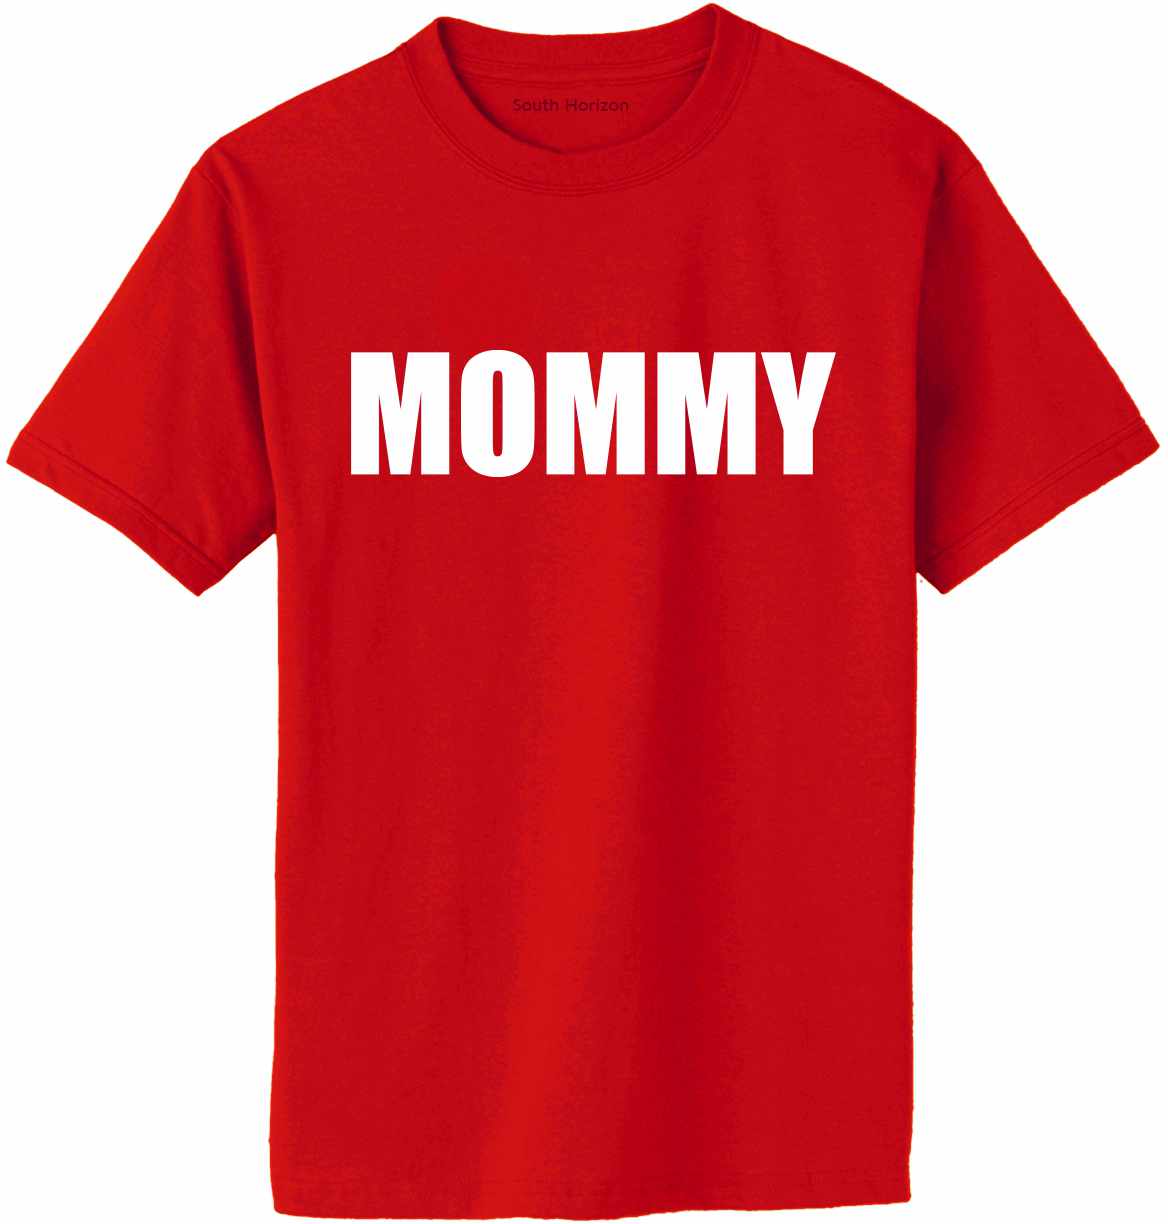 MOMMY Adult T-Shirt (#1077-1)